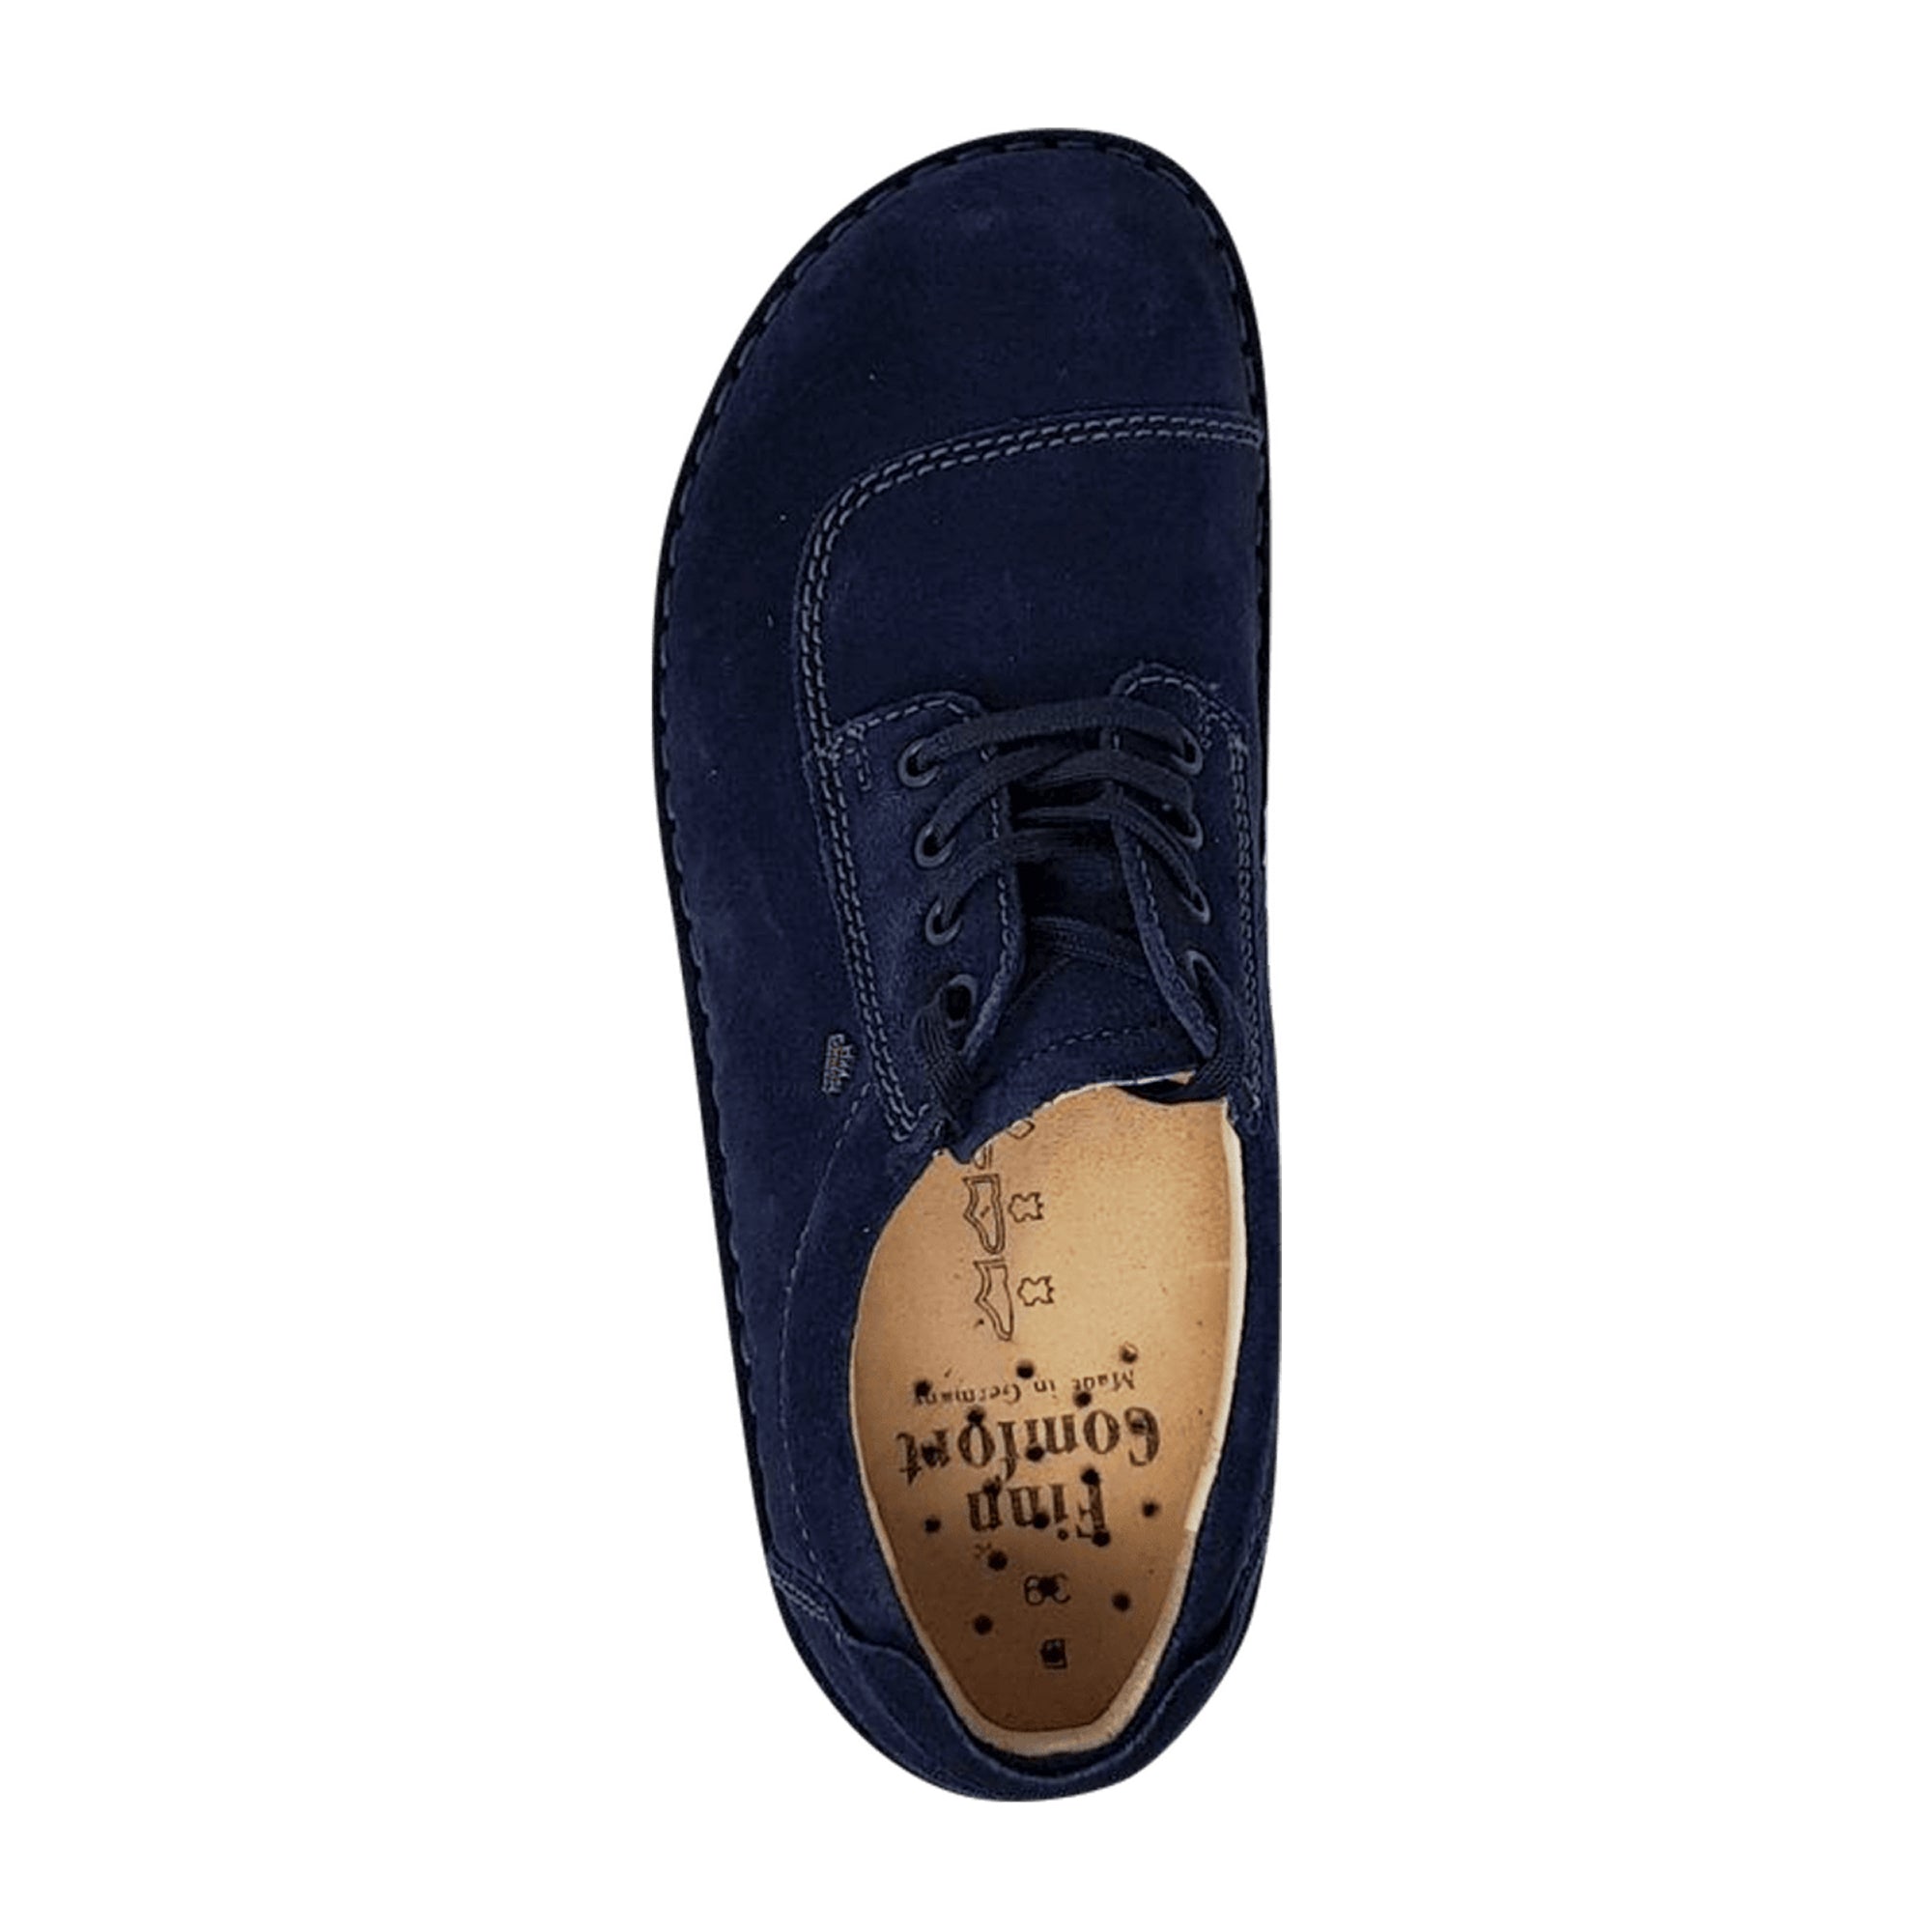 Finn Comfort Lexington Women's Lace-Up Shoes - Indigo Blue, Comfort Leather Sneakers with Removable Insole